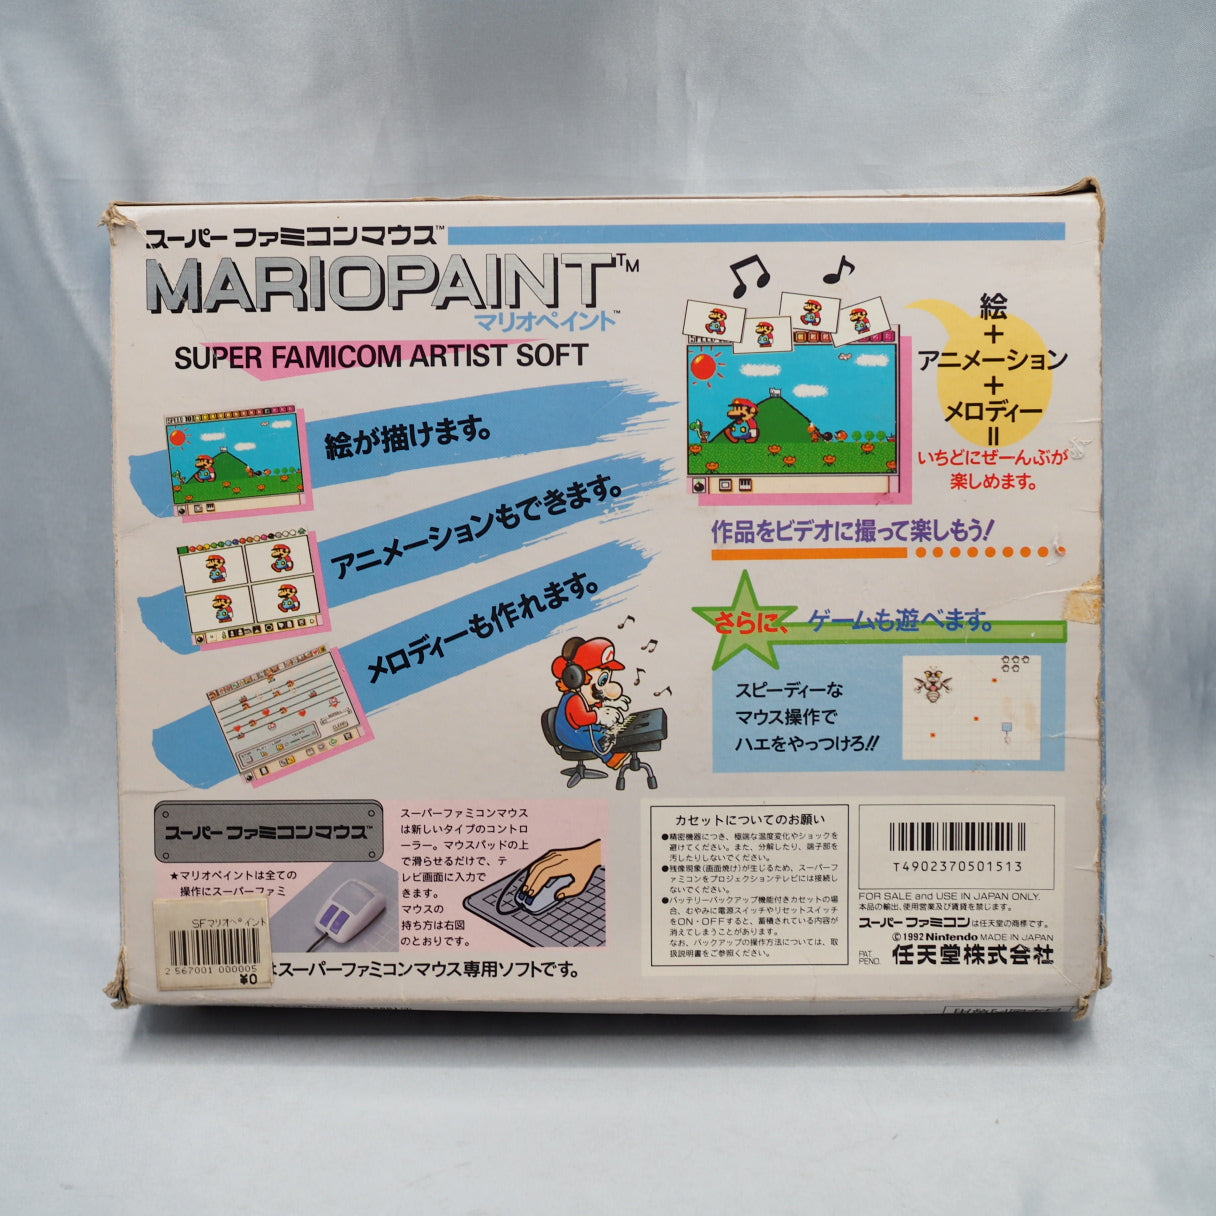 MARIO PAINT Mouse Controller Boxed